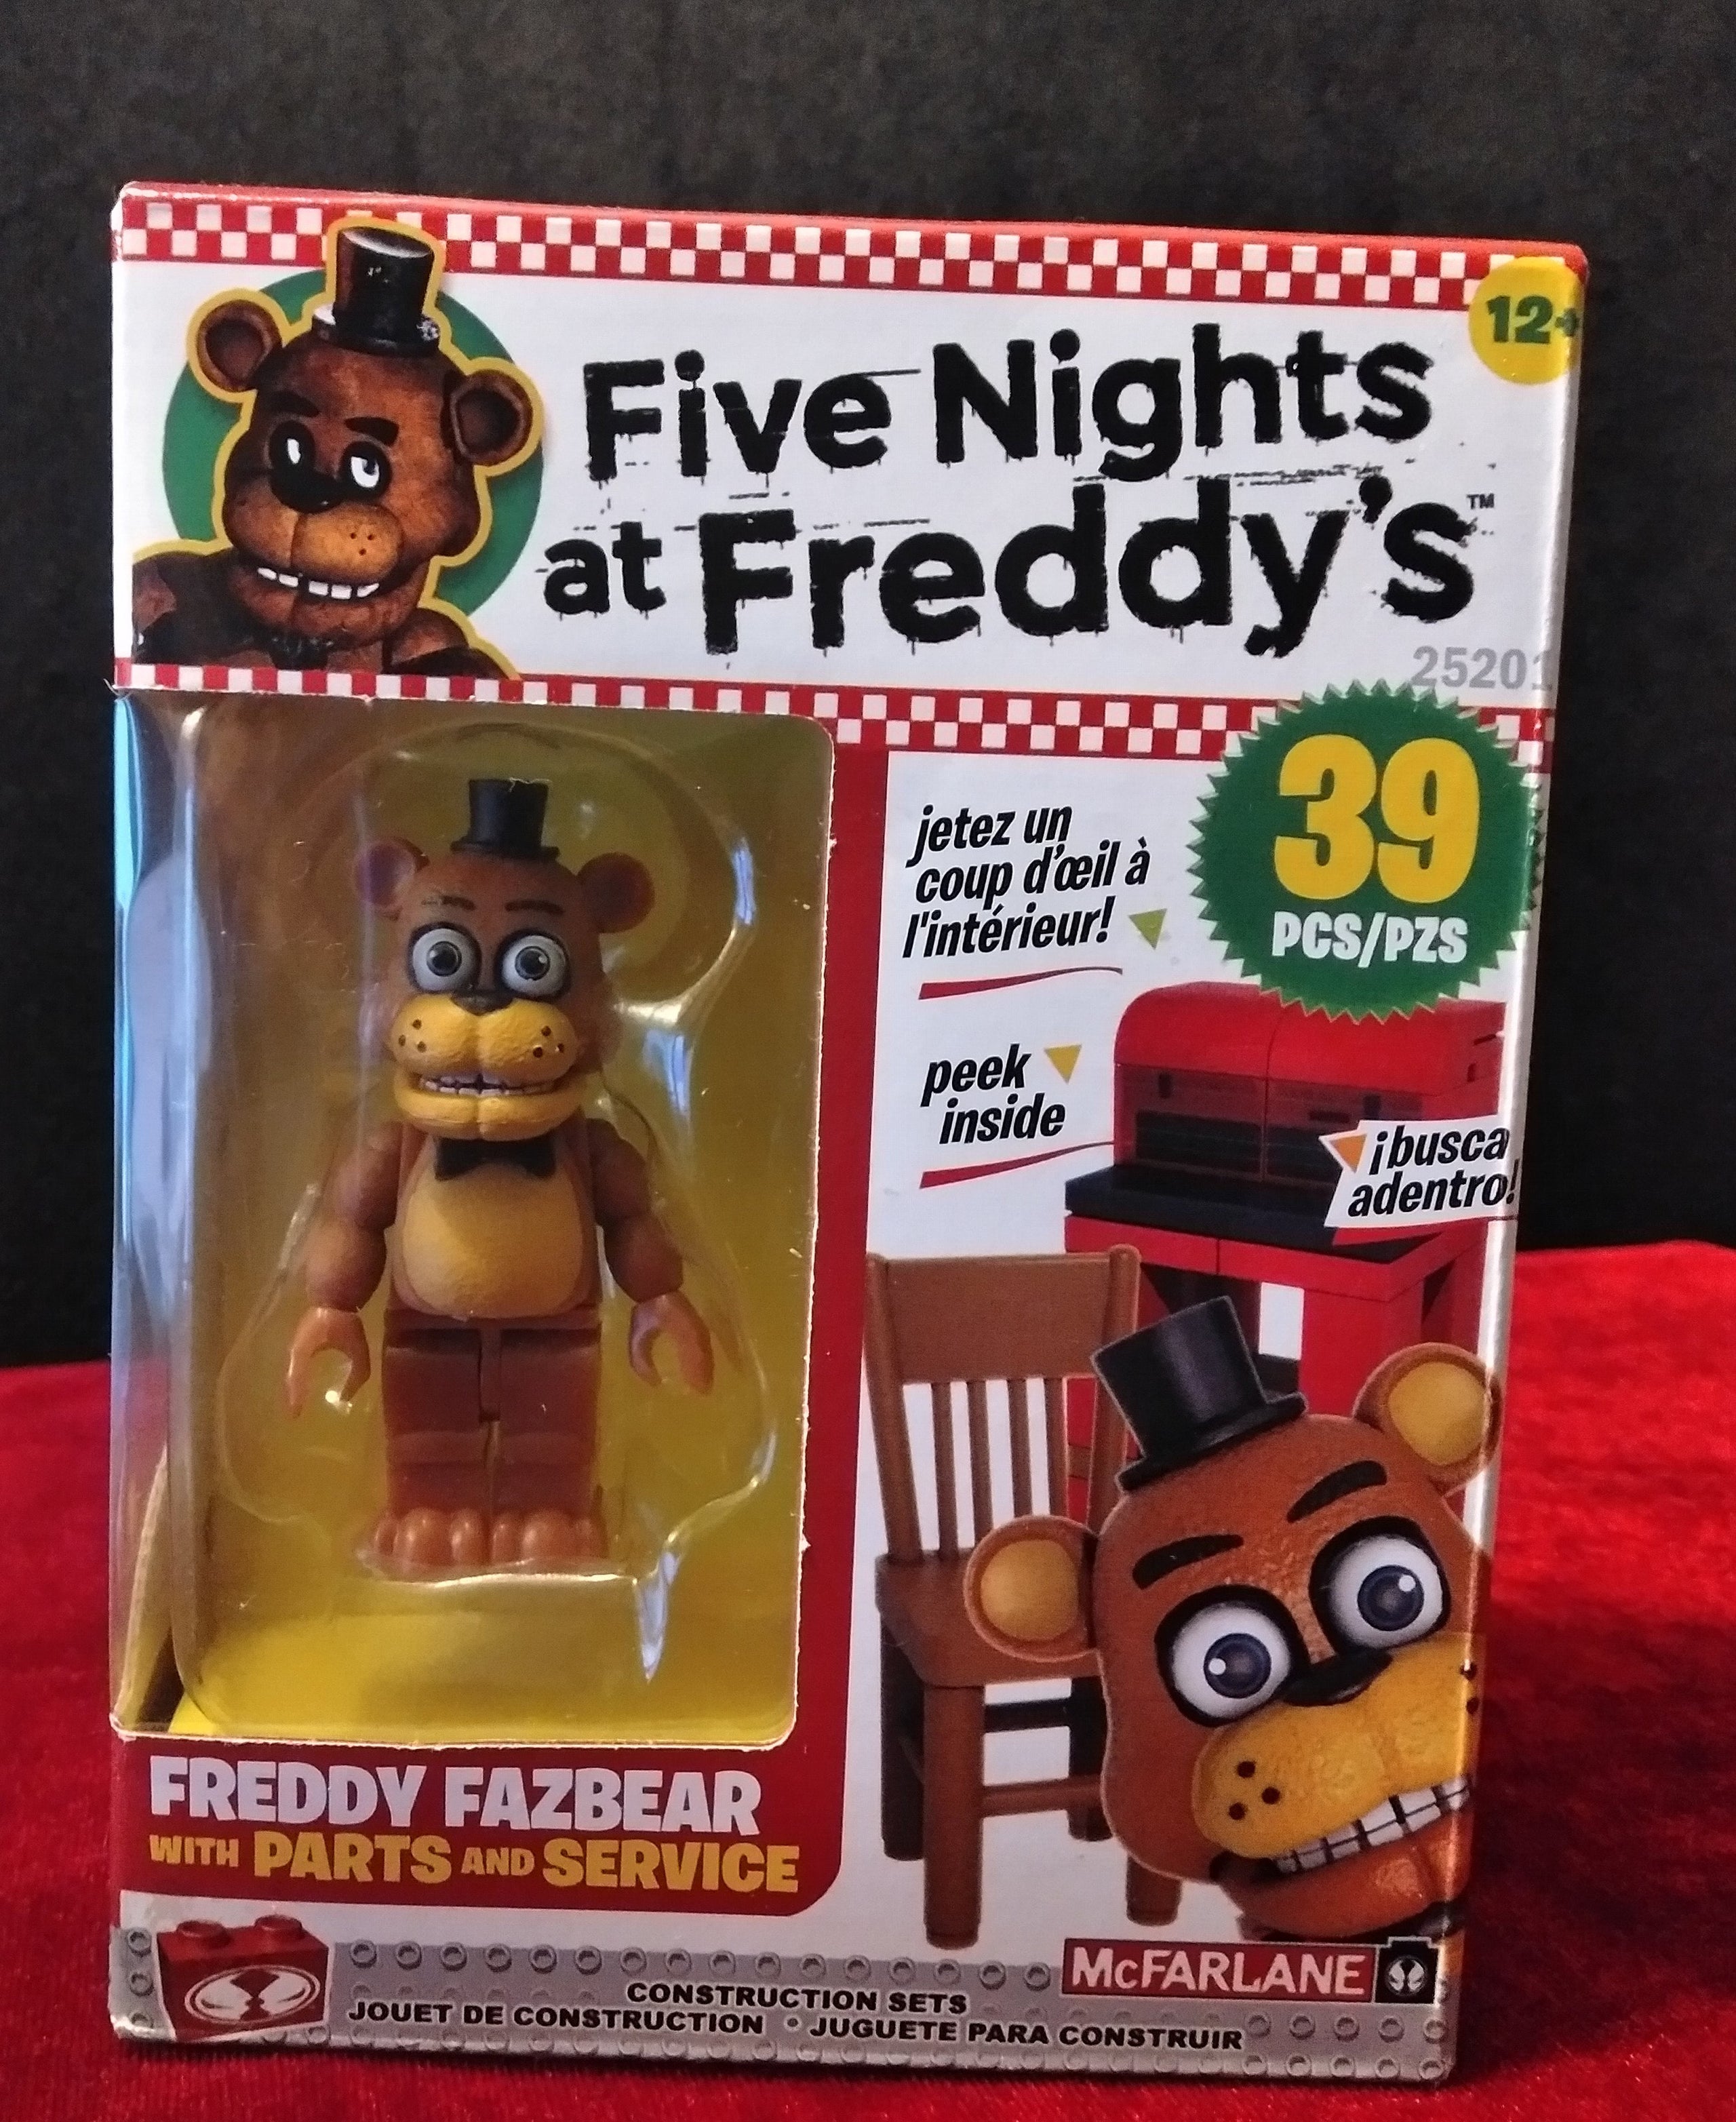 Five Nights At Freddy's Freddy Fazbear With Parts and Service McFARLANE  25201